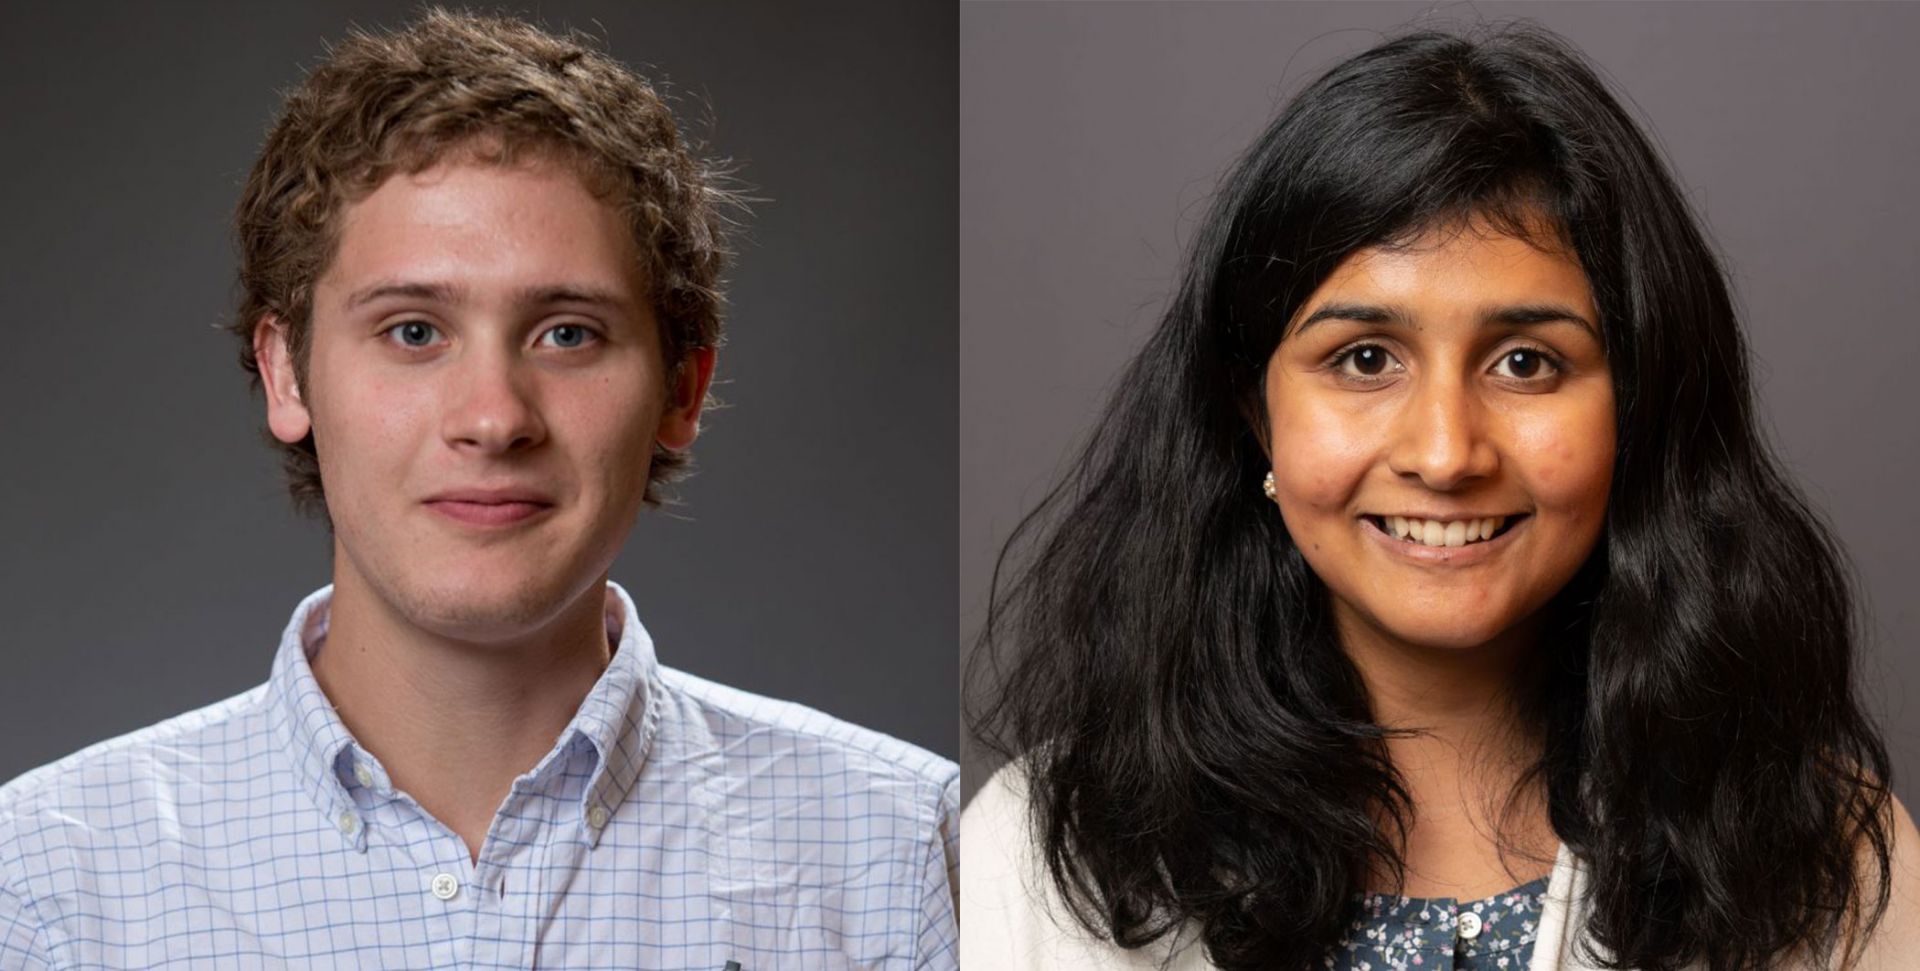 Ben Baer and Sara Venkatraman, two doctoral students in Cornell Statistics and Data Science